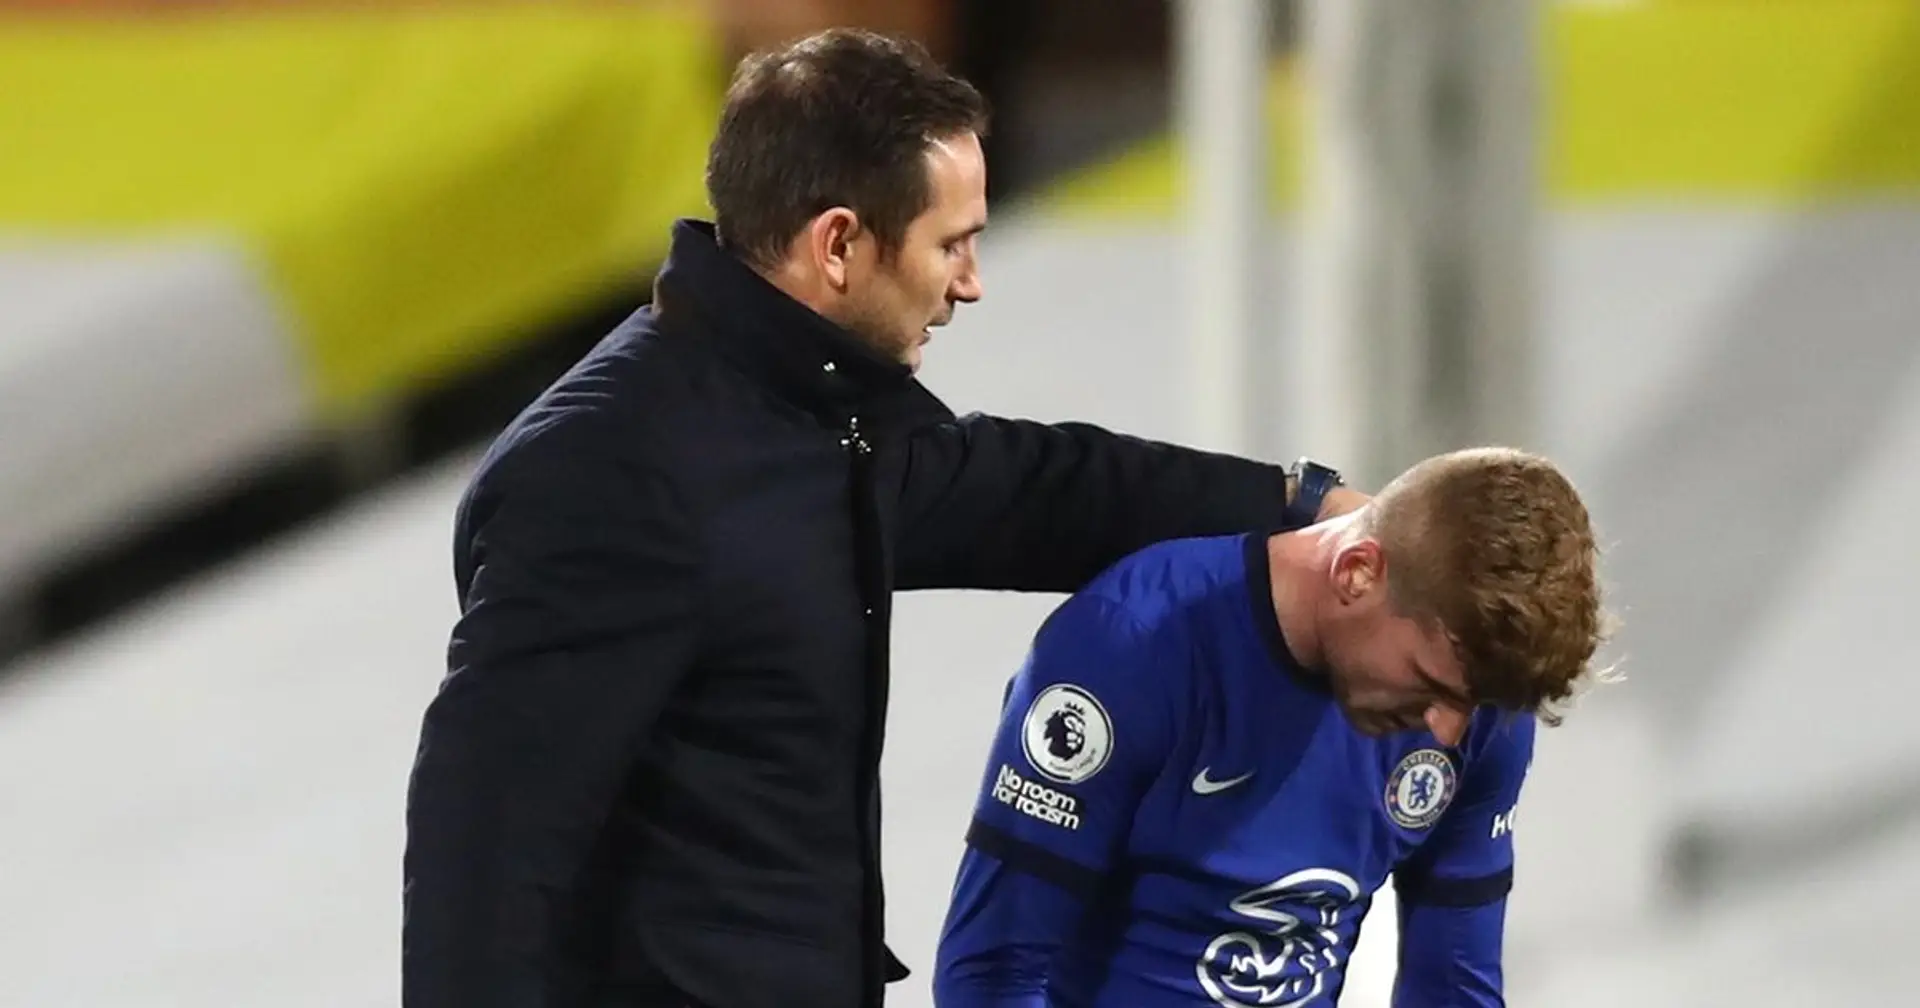 'Top strikers are hard on themselves': Lampard defends Werner amid Chelsea goal drought